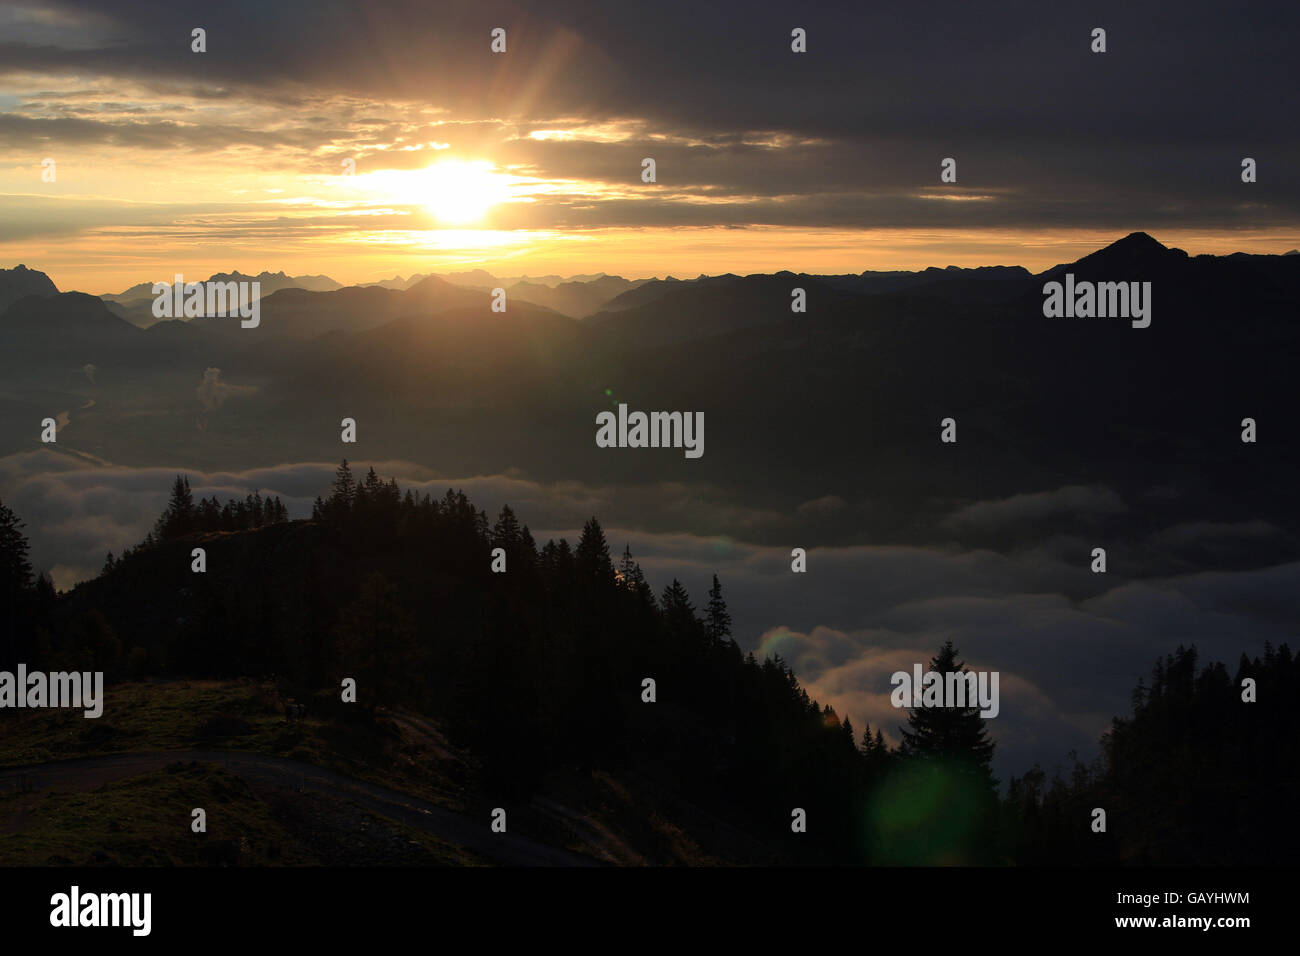 sunset/sunrise in mountains of the alps. Mountains appear as silhouettes because of the light setting. Stock Photo